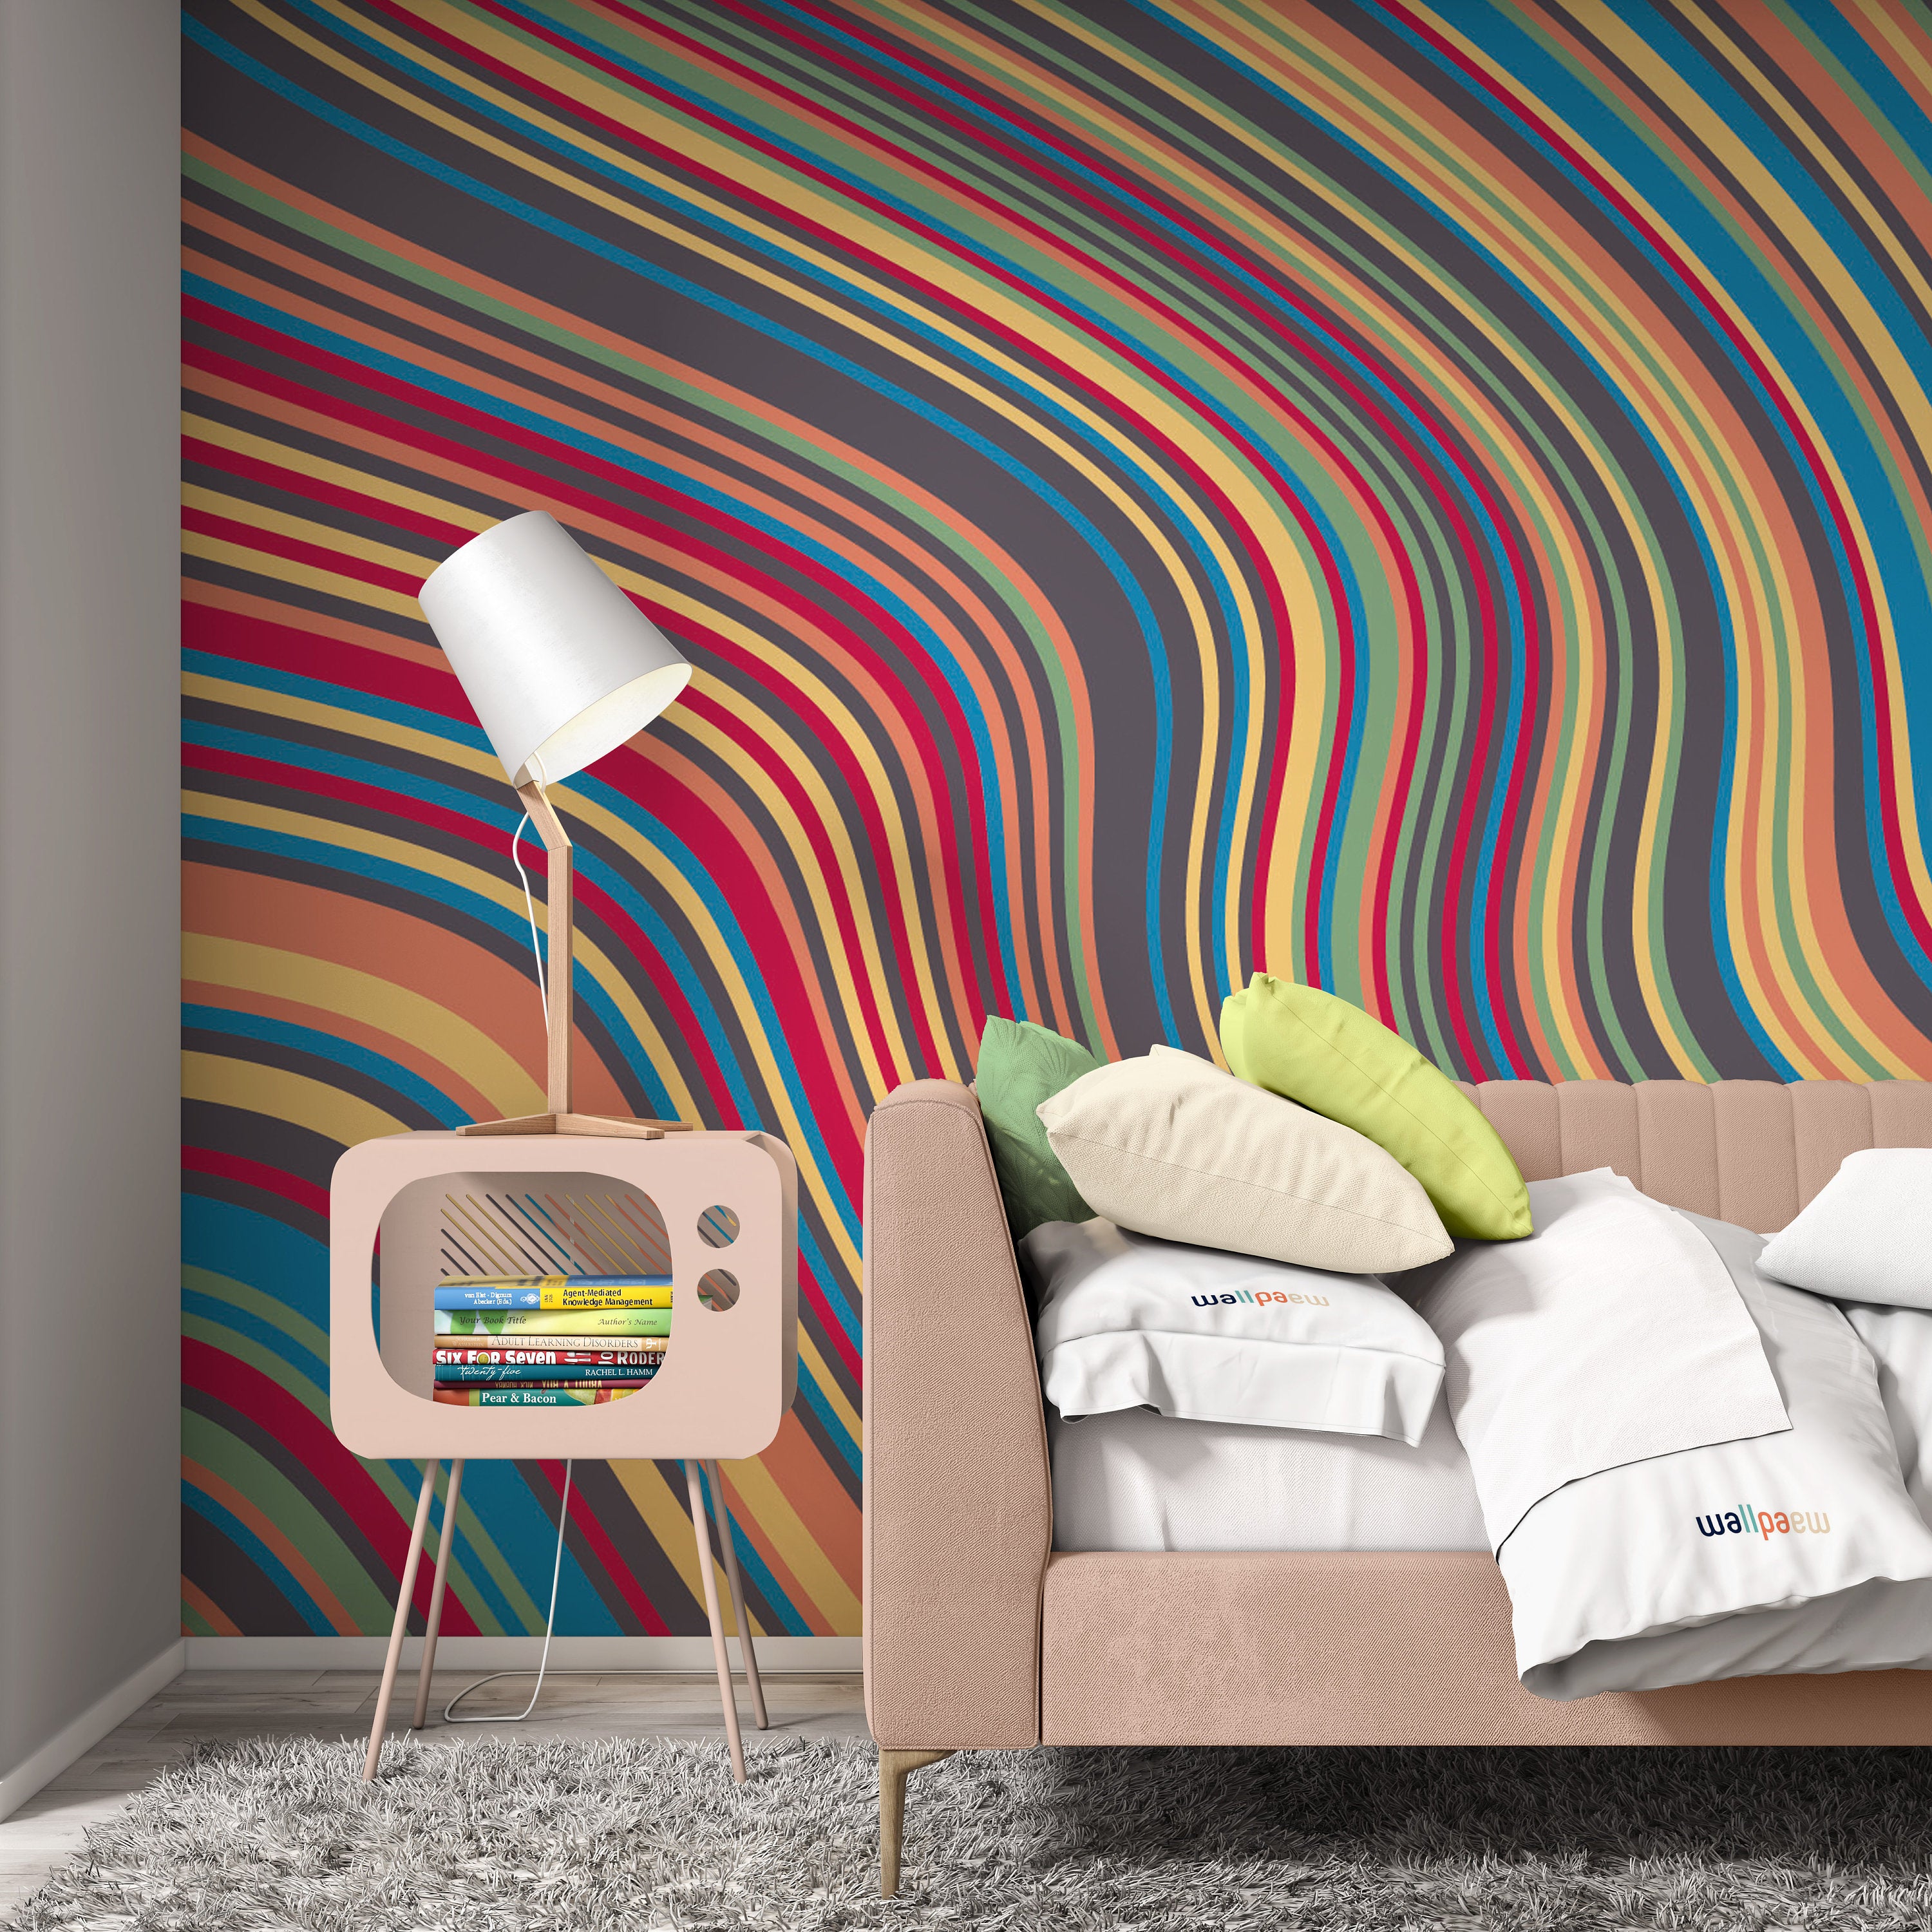 Abstract Background with Oblique Wavy Lines Rainbow Wallpaper Cafe Restaurant Decoration Living Room Bedroom Mural Home Decor Wall Art